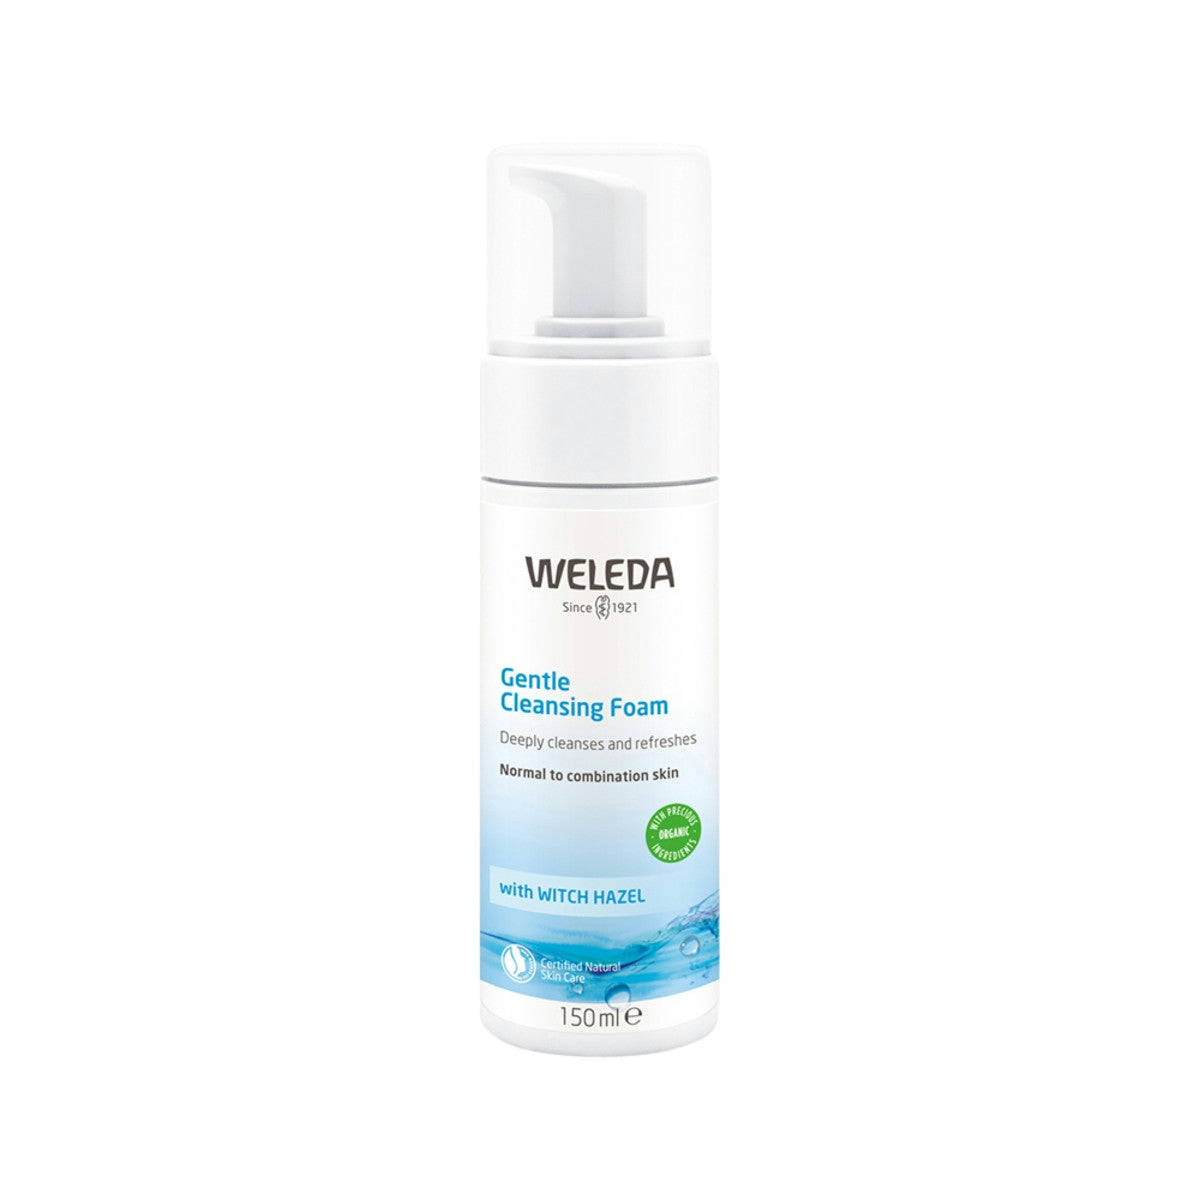 image of Weleda Gentle Cleansing Foam (Normal & Combination Skin) with Organic Witch Hazel 150ml on white background